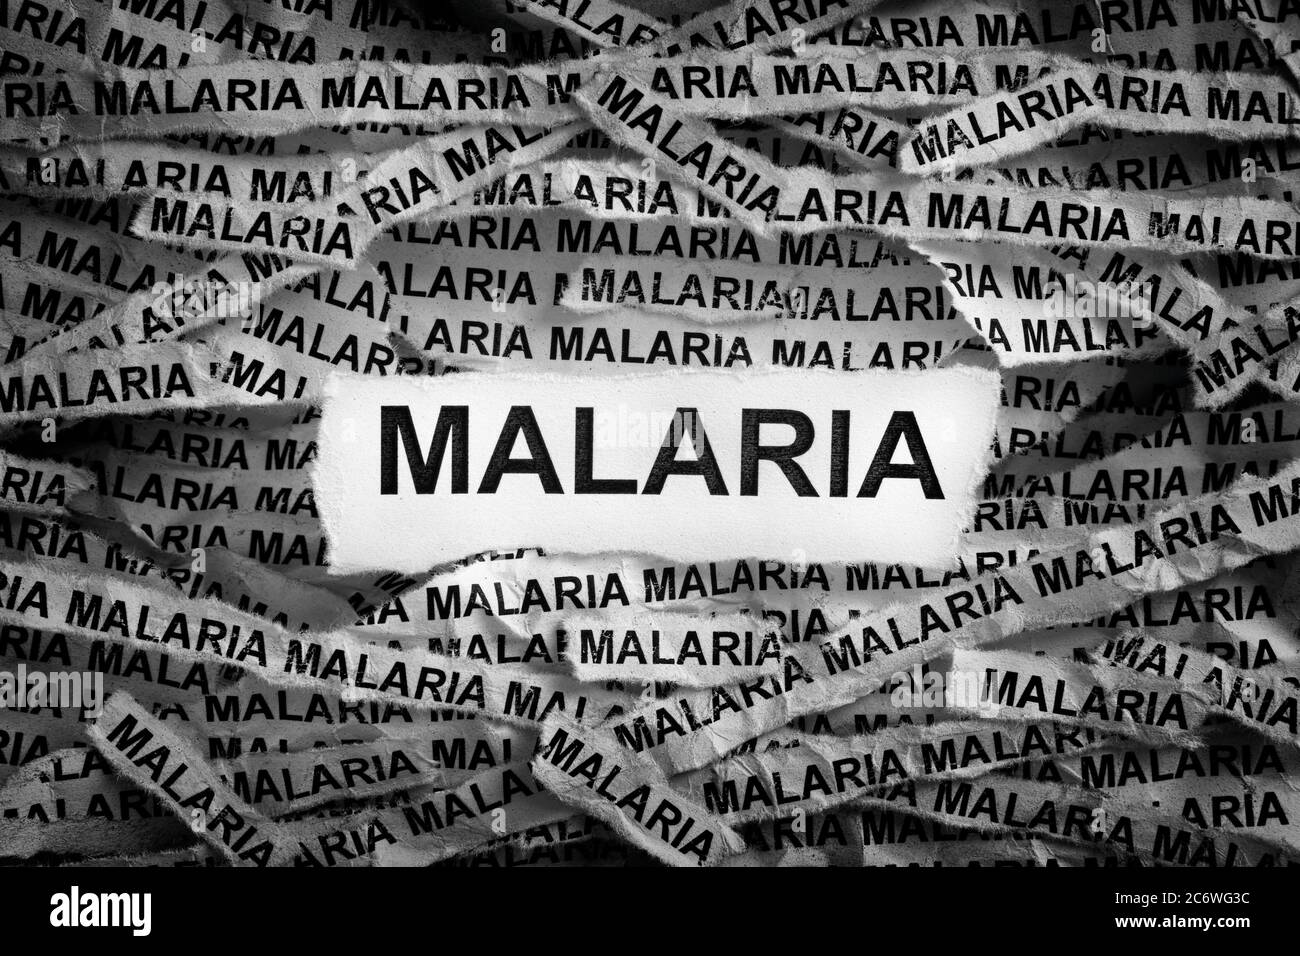 Malaria. Torn pieces of paper with the word Malaria. Concept Image. Black and white. Close up. Stock Photo